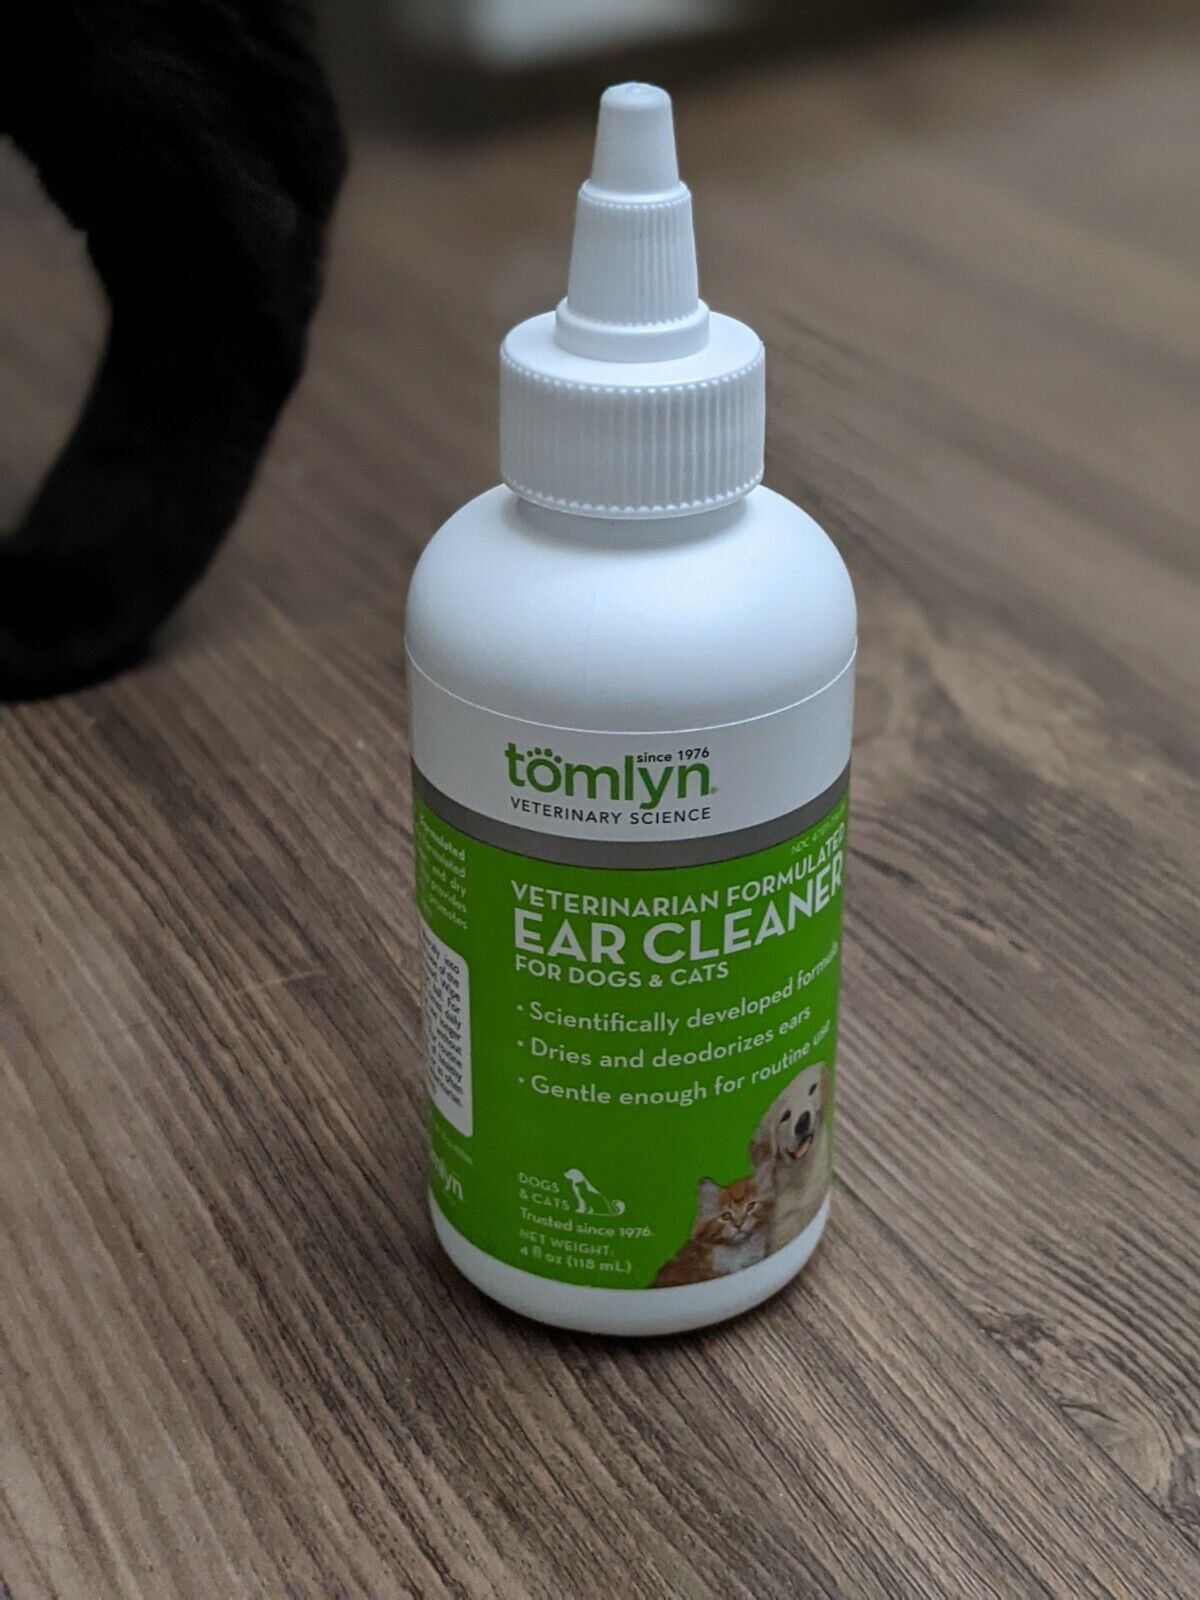 Tomlyn Veteranian Formulated Ear Cleaner for Dogs & Cats, 4 Fl Oz (118 mL)